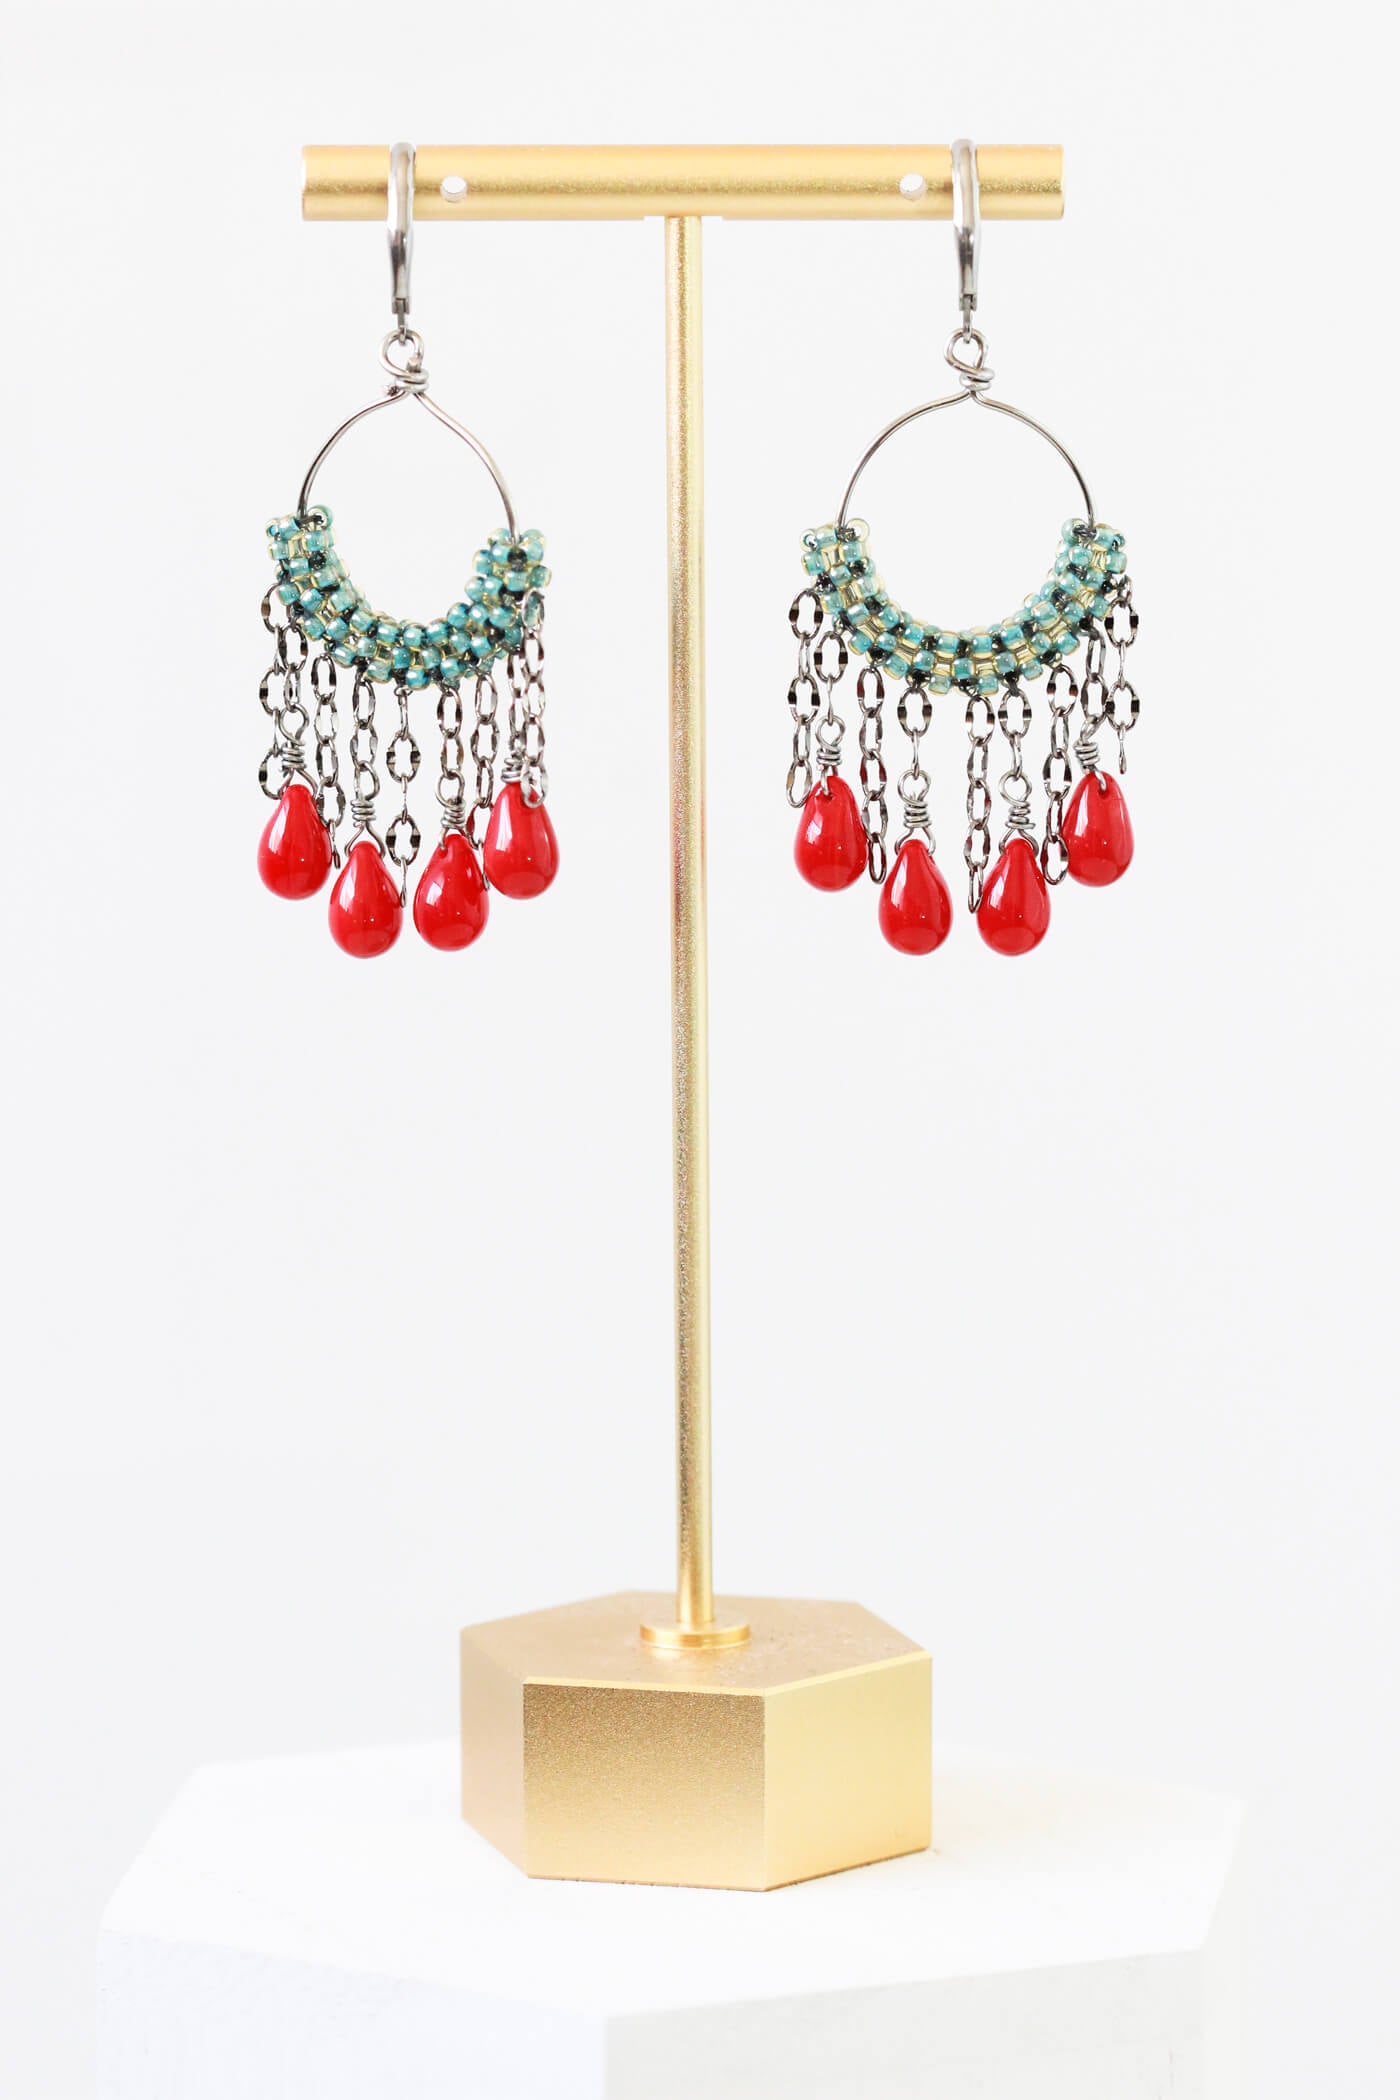 Bold Jewelry - Red & Green Statement Earrings by Kaleidoscopes And Polka Dots